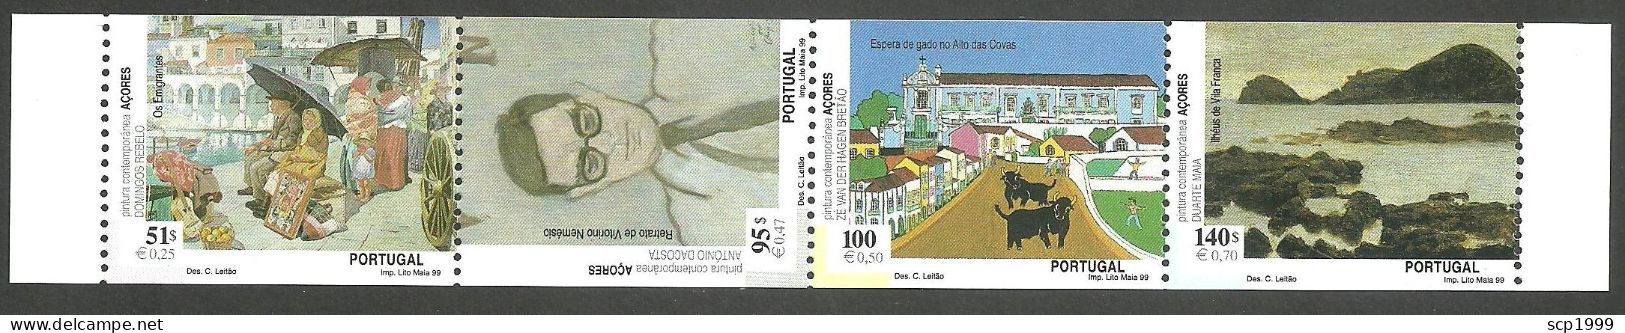 Portugal 1999 - Azores Paintings Booklet MNH - Carnets